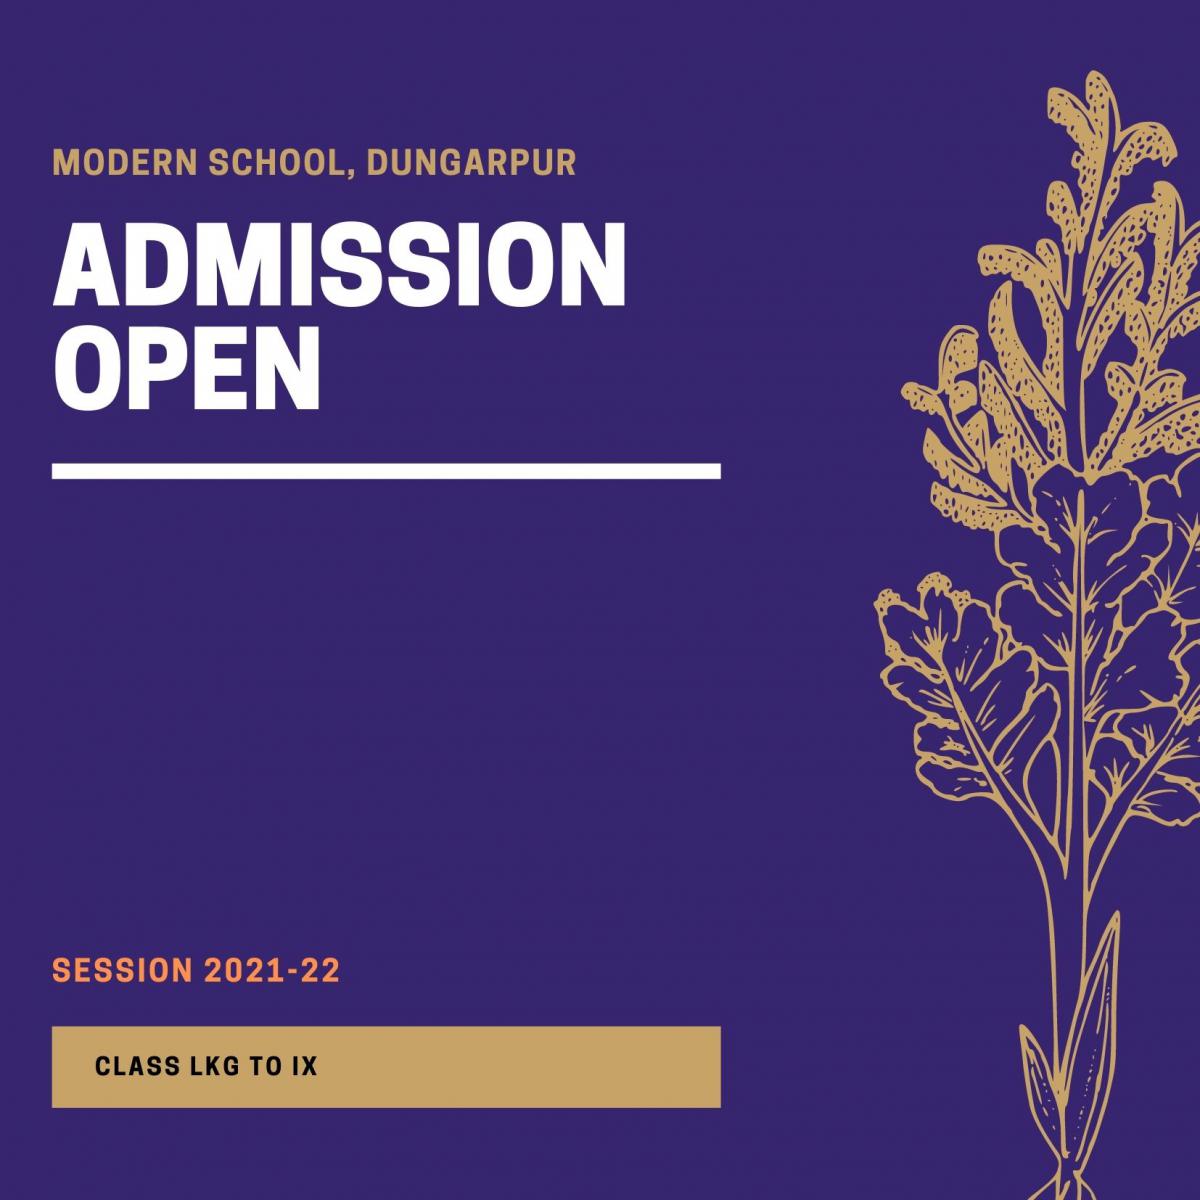 New Admission Information for LKG to IX Session 2021-22